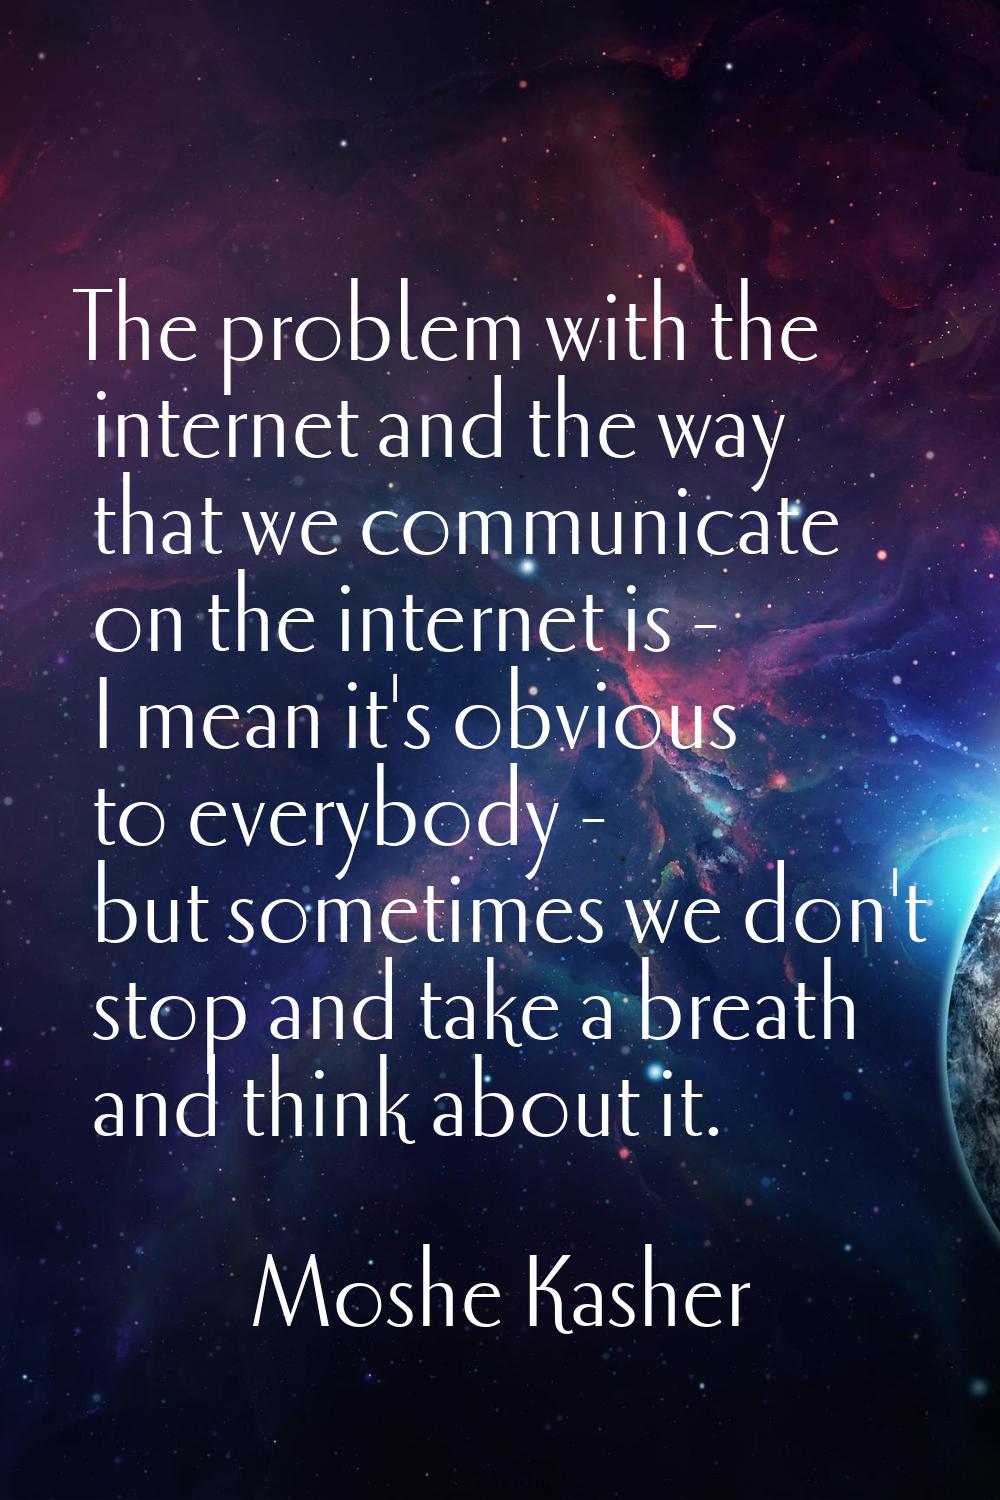 The problem with the internet and the way that we communicate on the internet is - I mean it's obvi